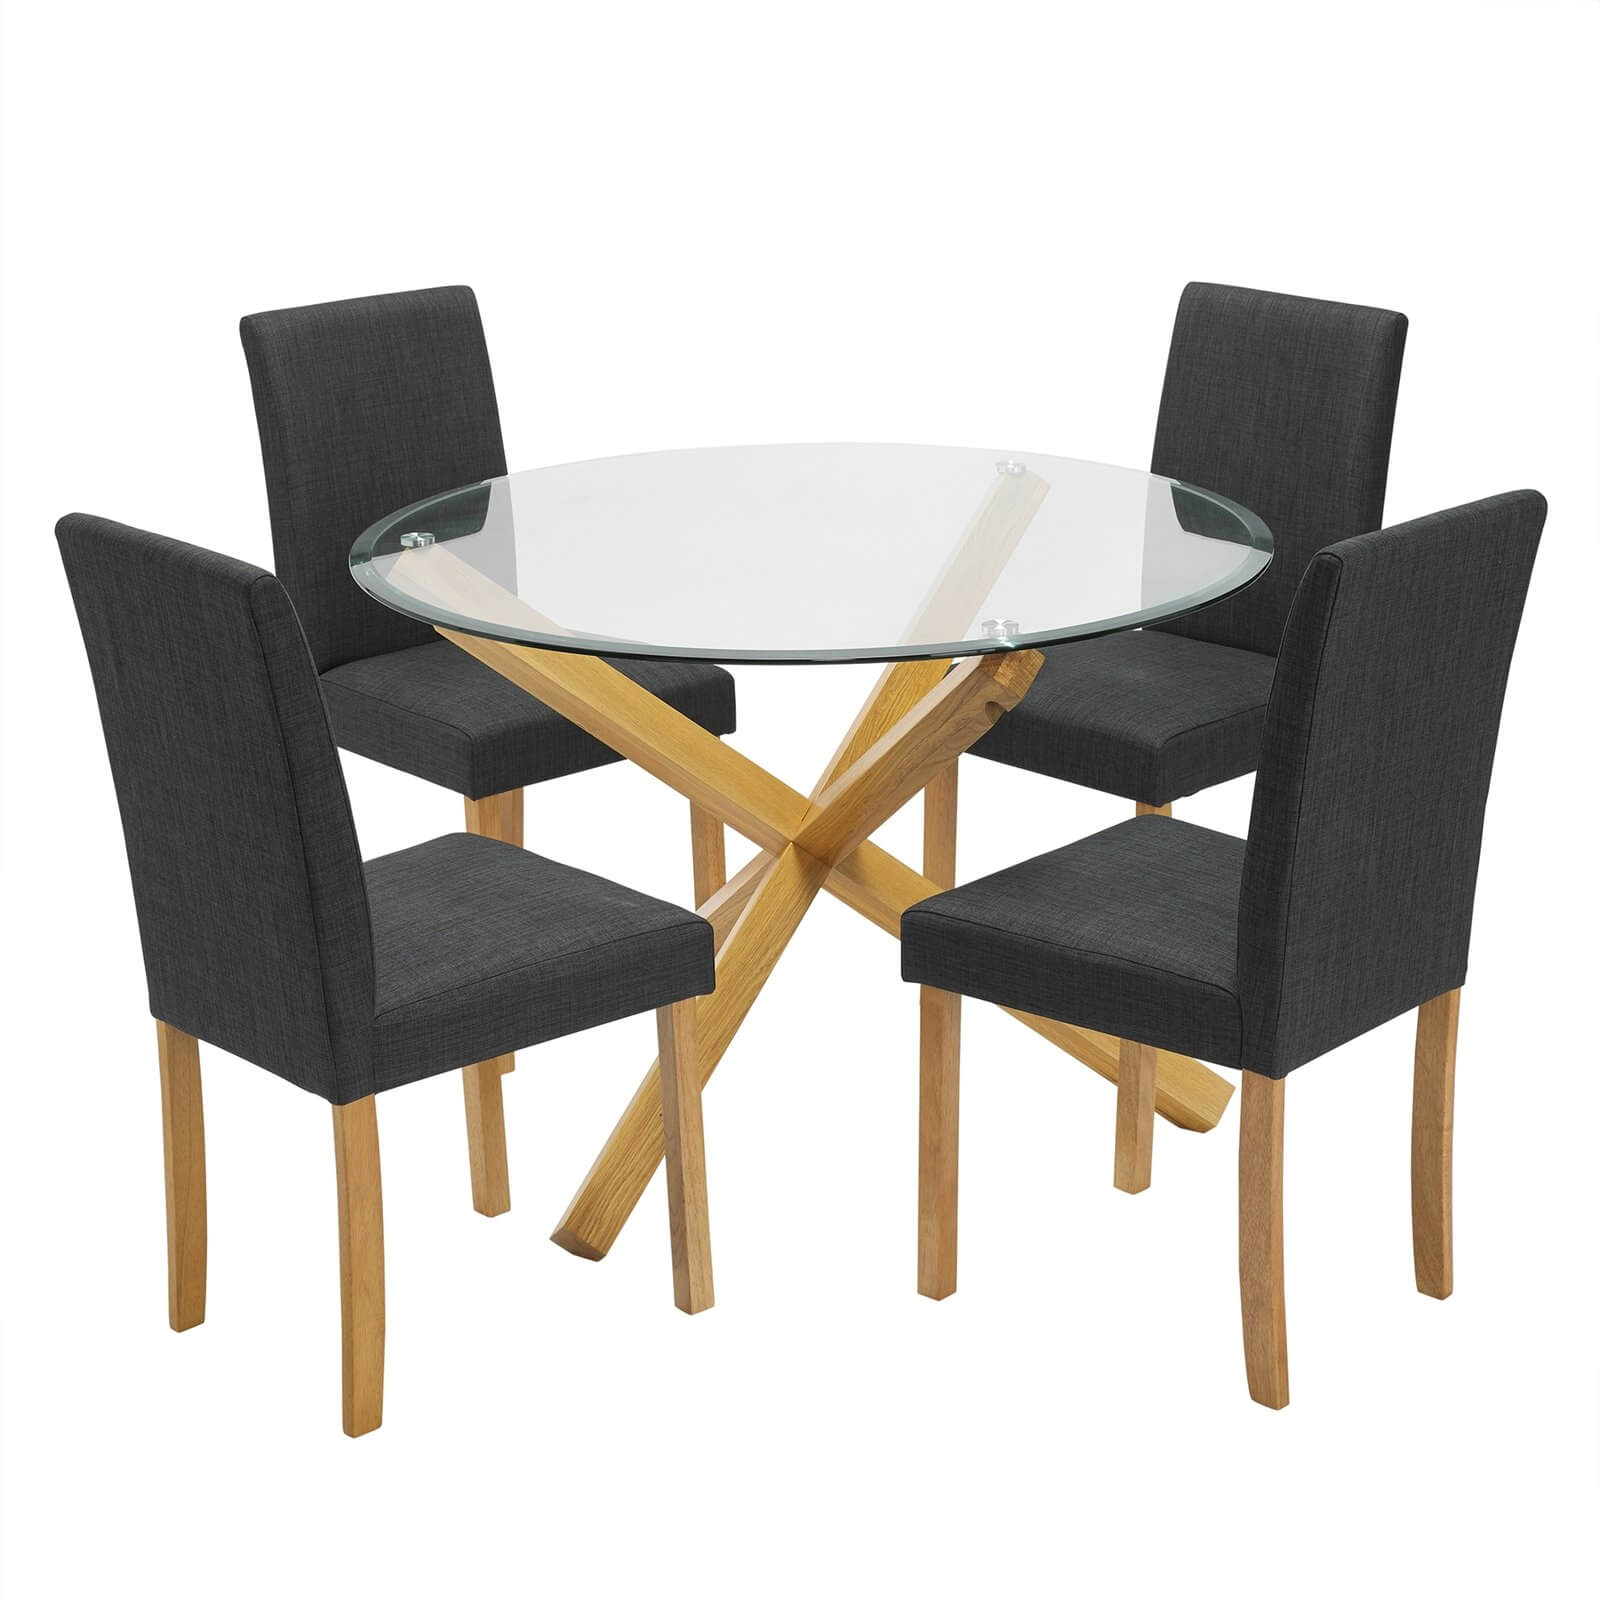 Oporto 4 Seater Dining Set - Anna Dining Chairs - Grey